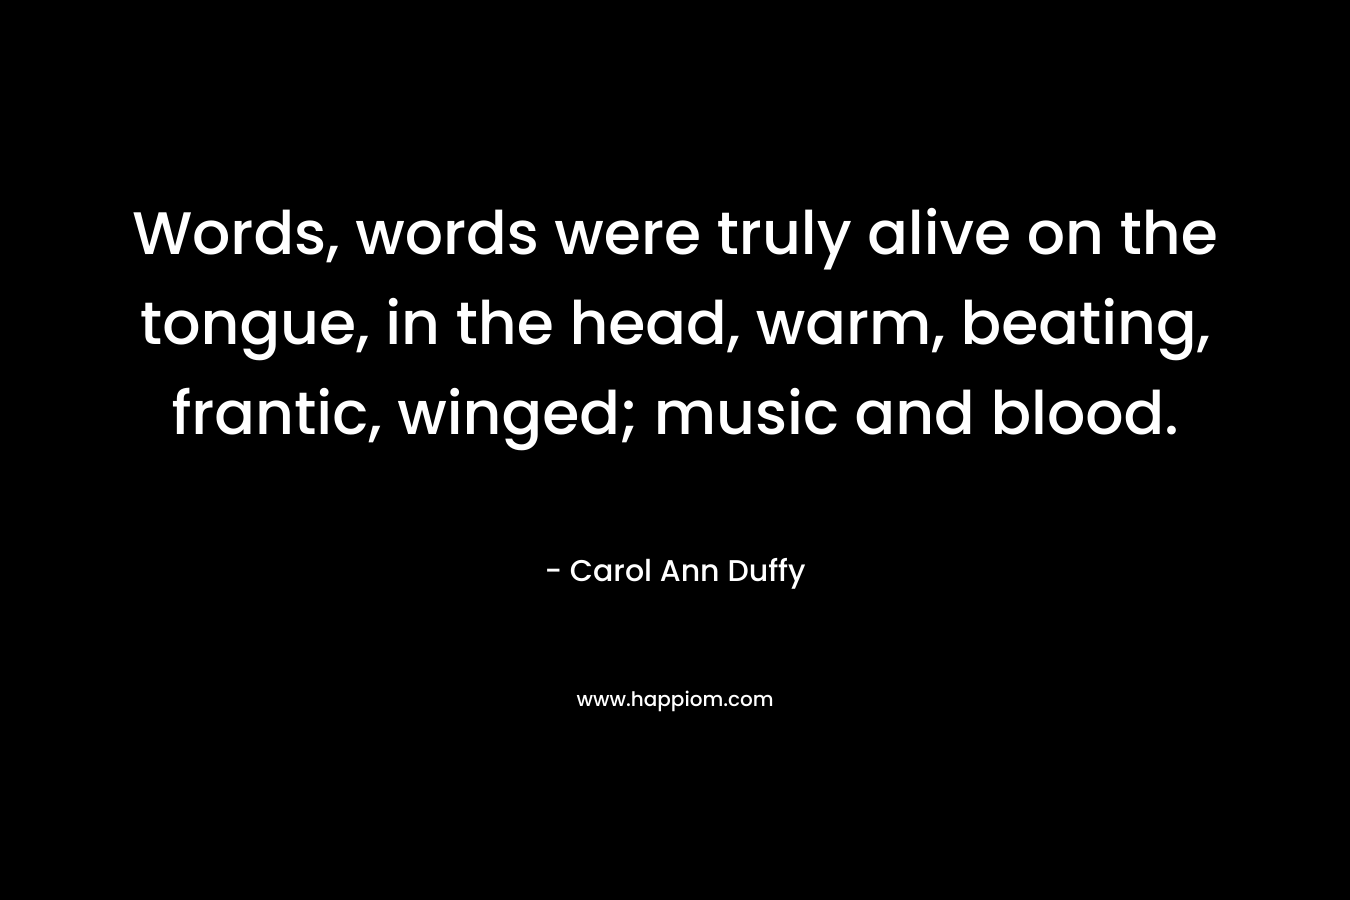 Words, words were truly alive on the tongue, in the head, warm, beating, frantic, winged; music and blood. – Carol Ann Duffy